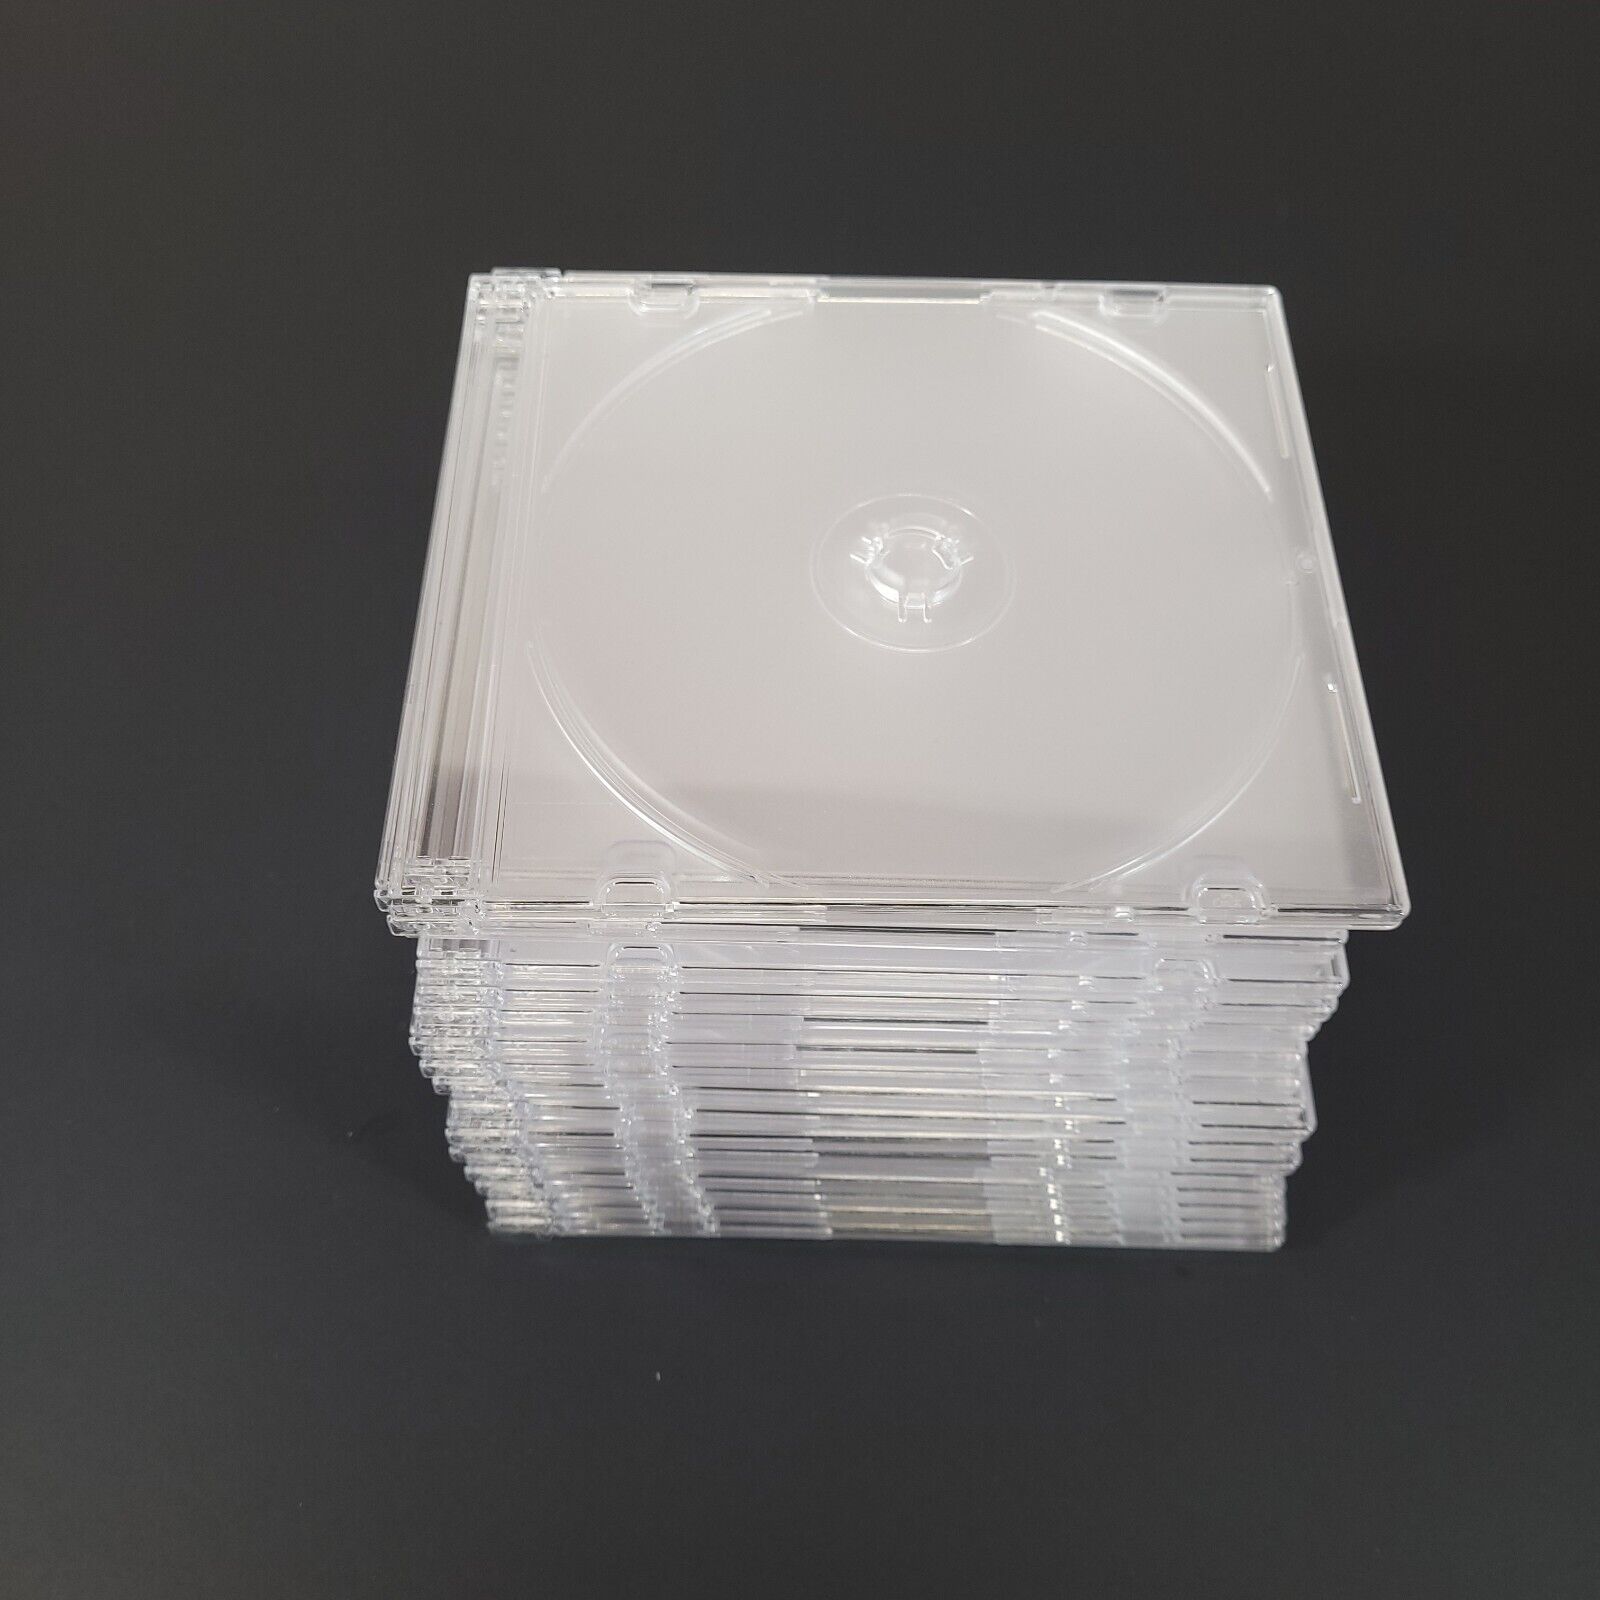 20 Pack Standard CD DVD Cases Single Slim Disc Storage Assembled Clear PP Tray